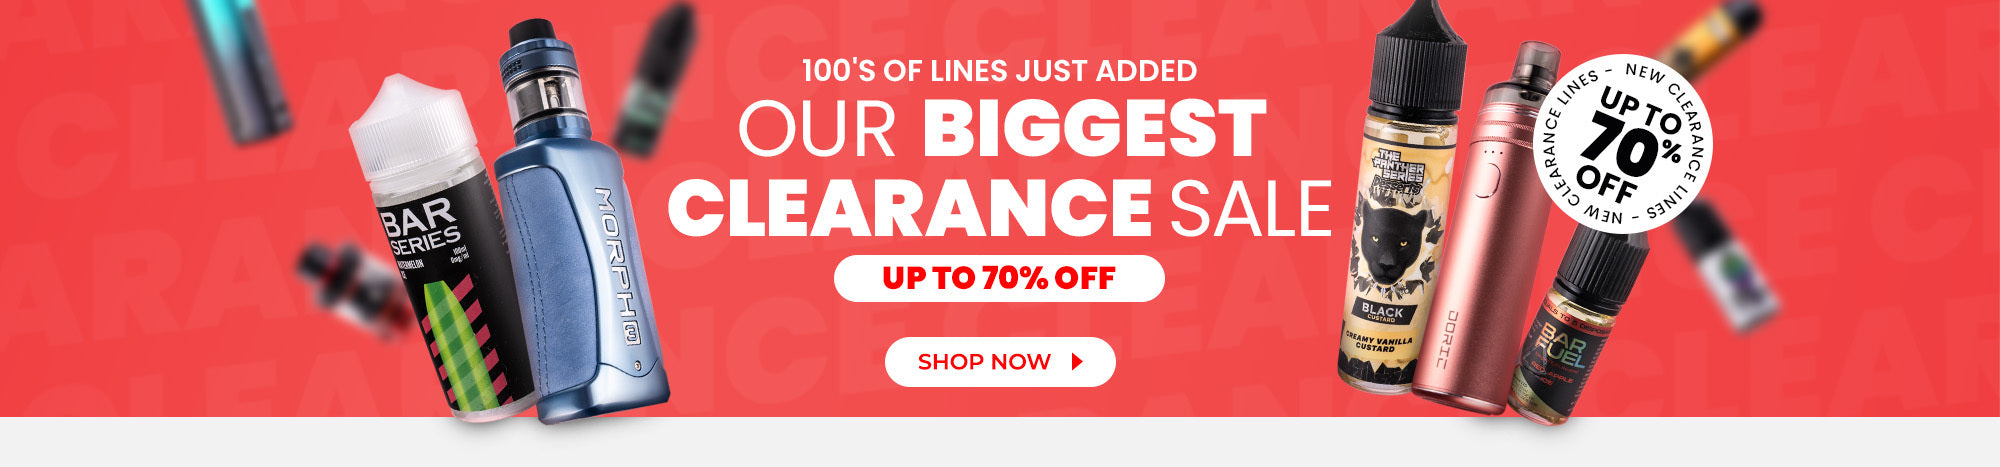 New Lines Added - Up to 70% off Clearance Sale